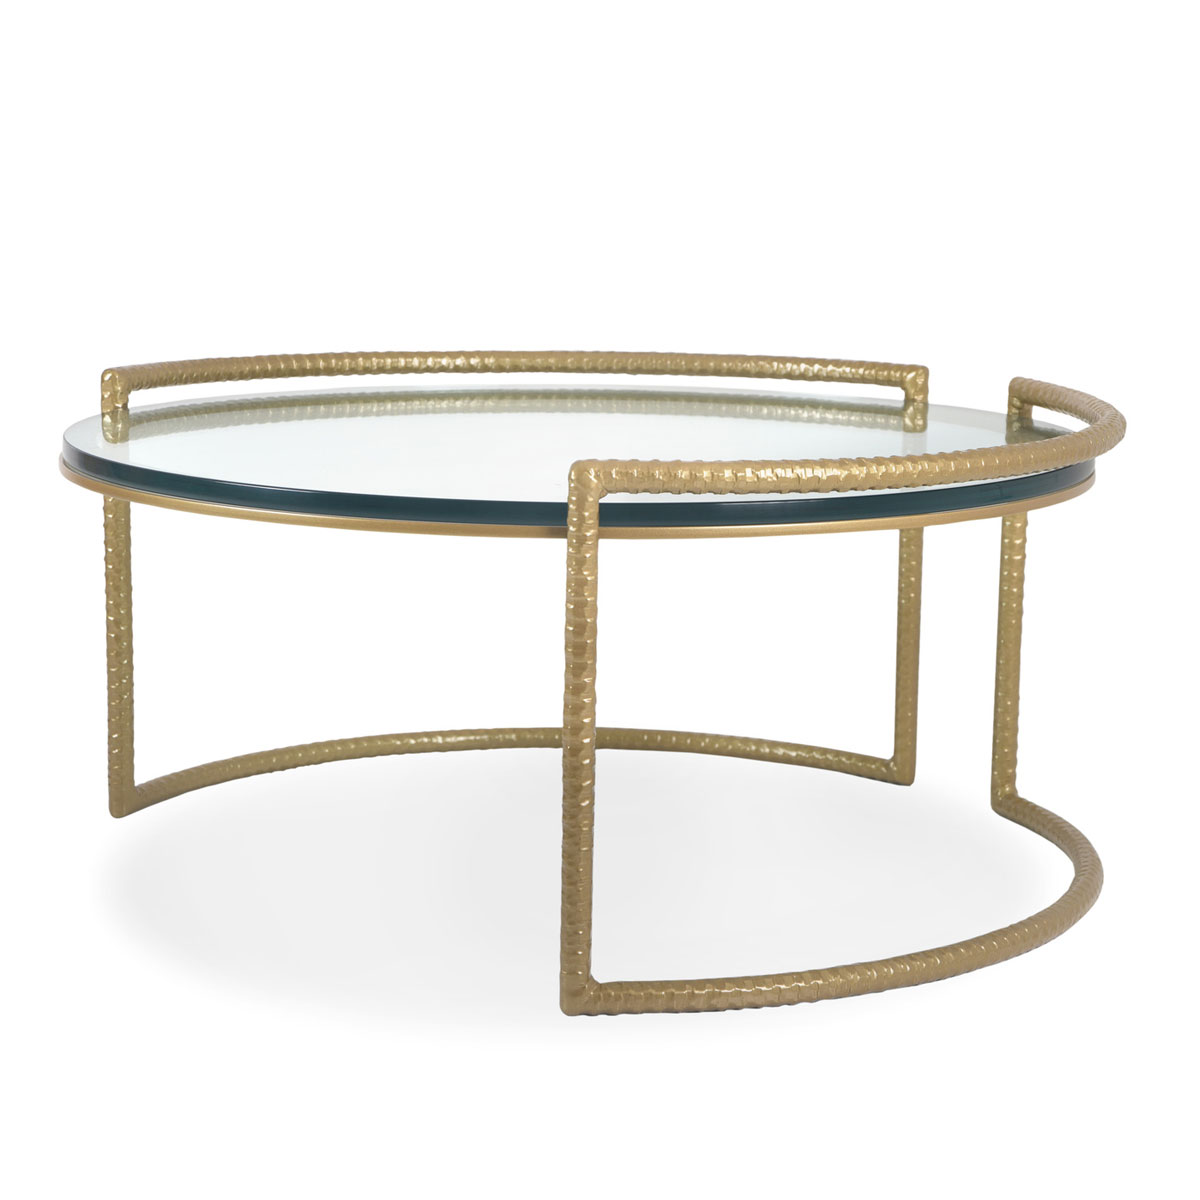 Charleston Forge Spa 36 inch Round Cocktail Table